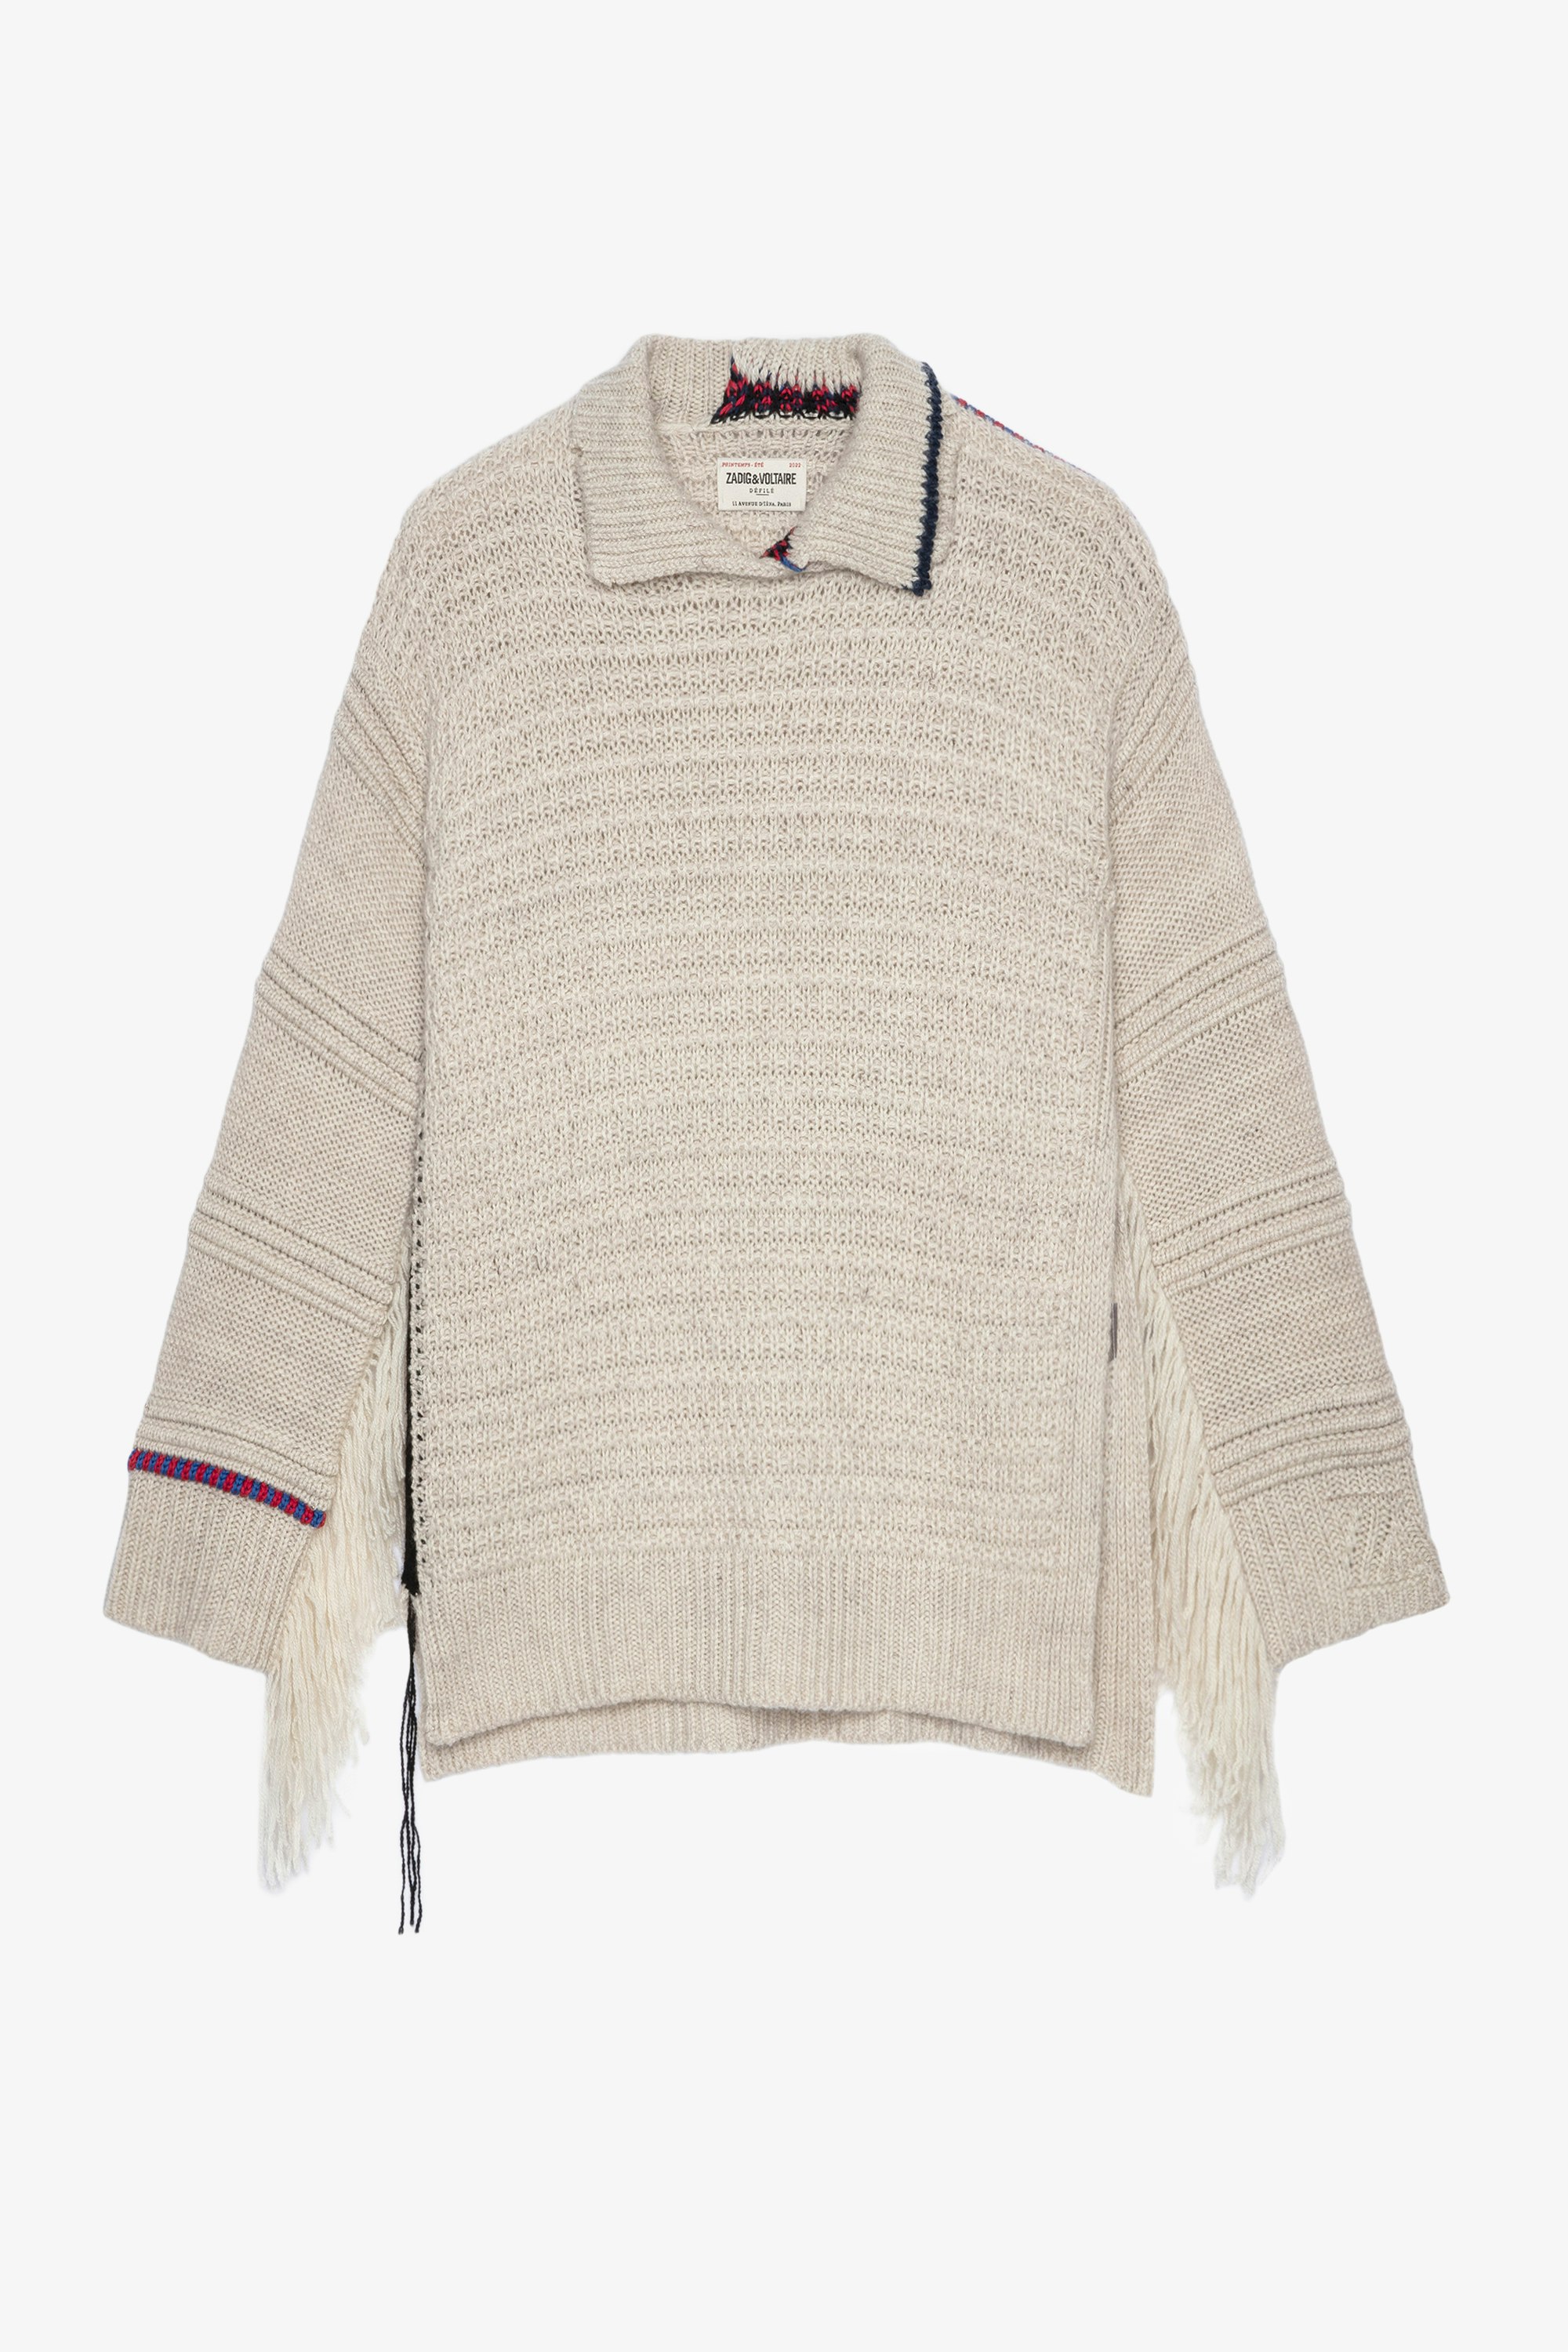 Cassidy Jumper Cashmere Women's long jumper in beige knit with fringes